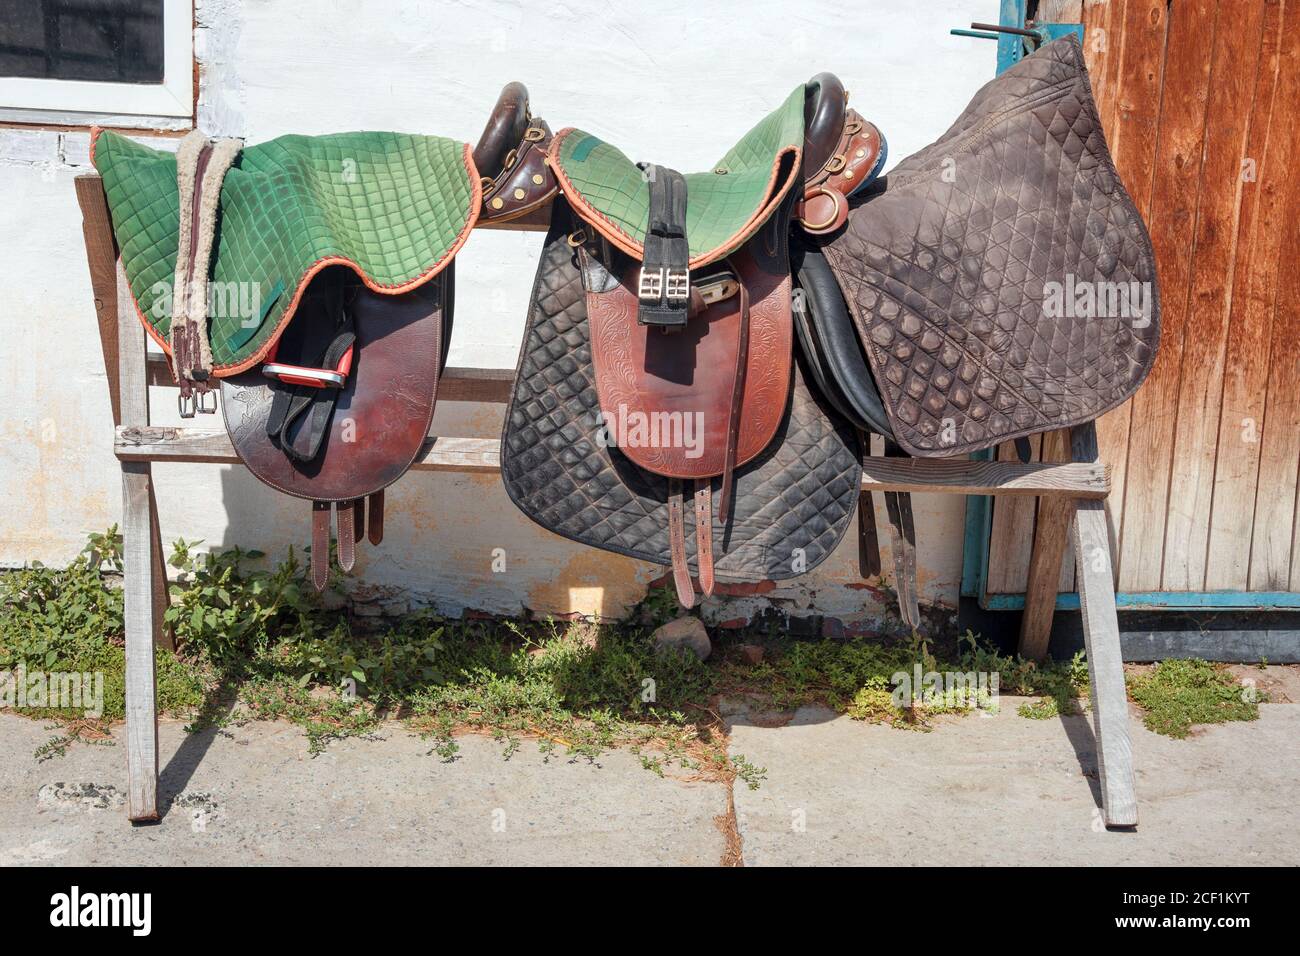 Harness for horses in horse club. Worn ranch saddles and girth. Ridding school on a horse farm Stock Photo